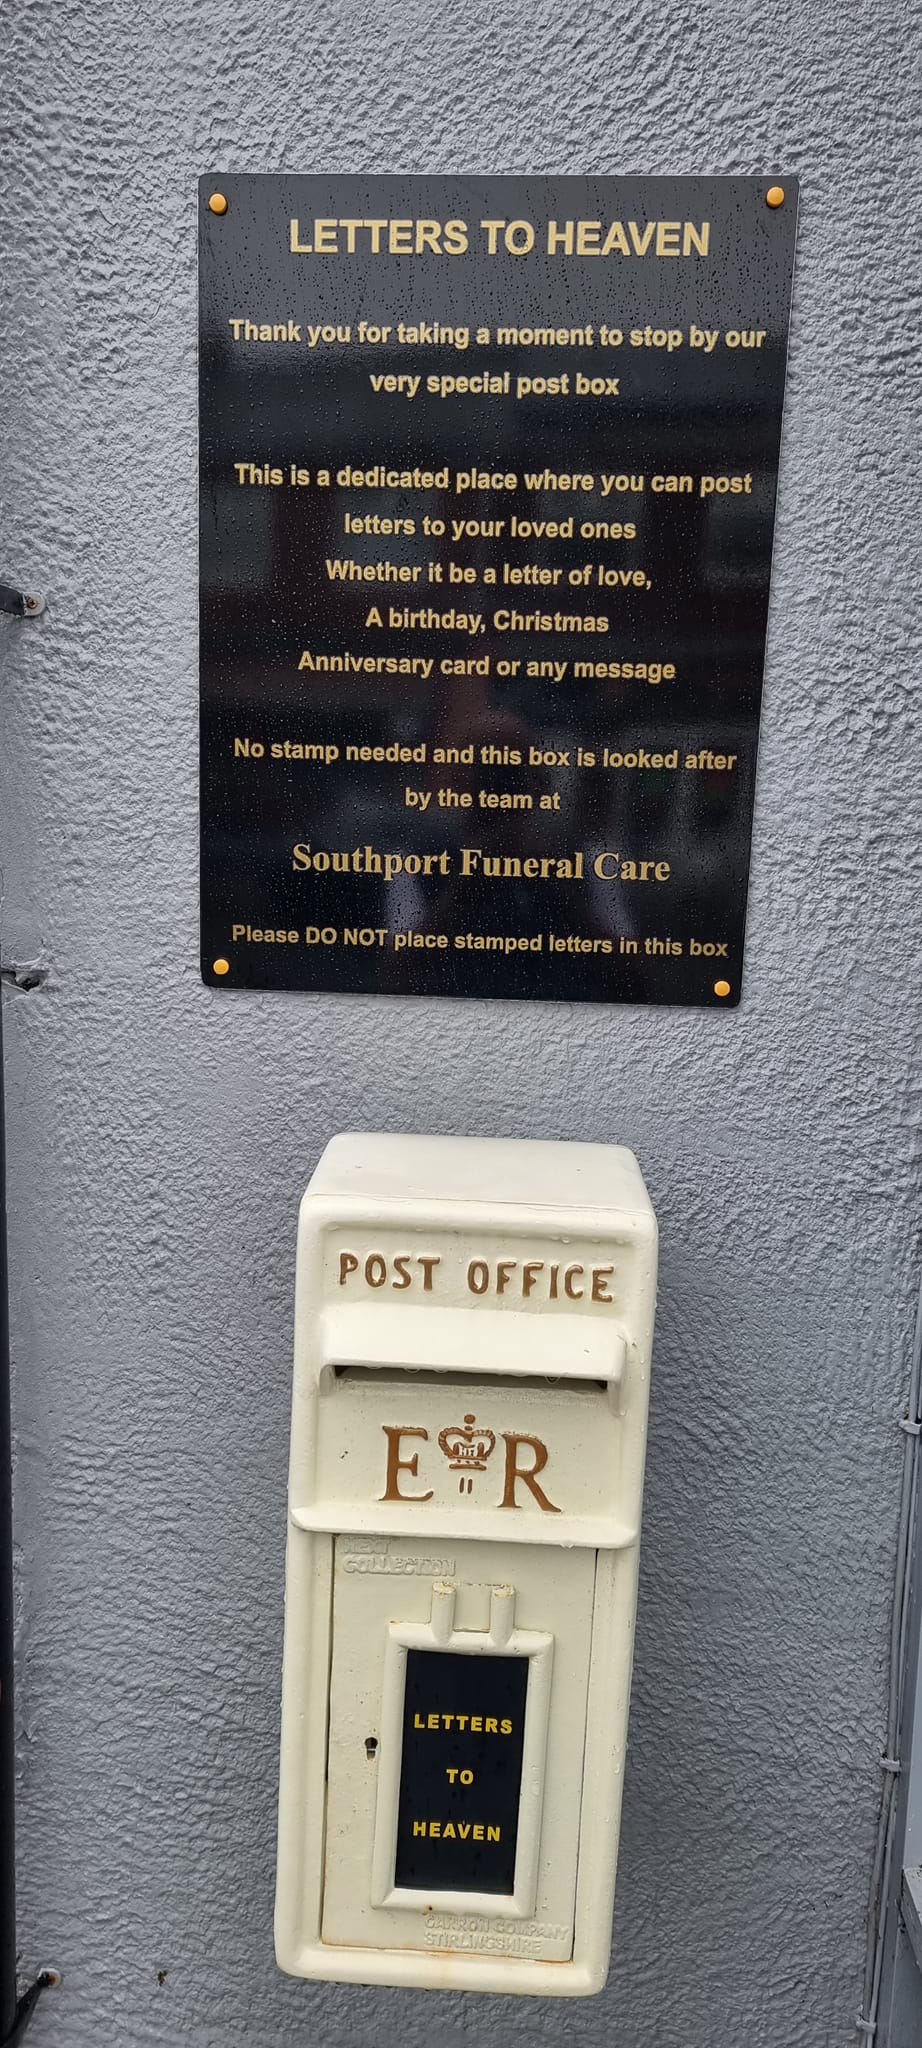 Southport Funeral Care has created a special postbox outside the premises where people can post their Letters To Heaven